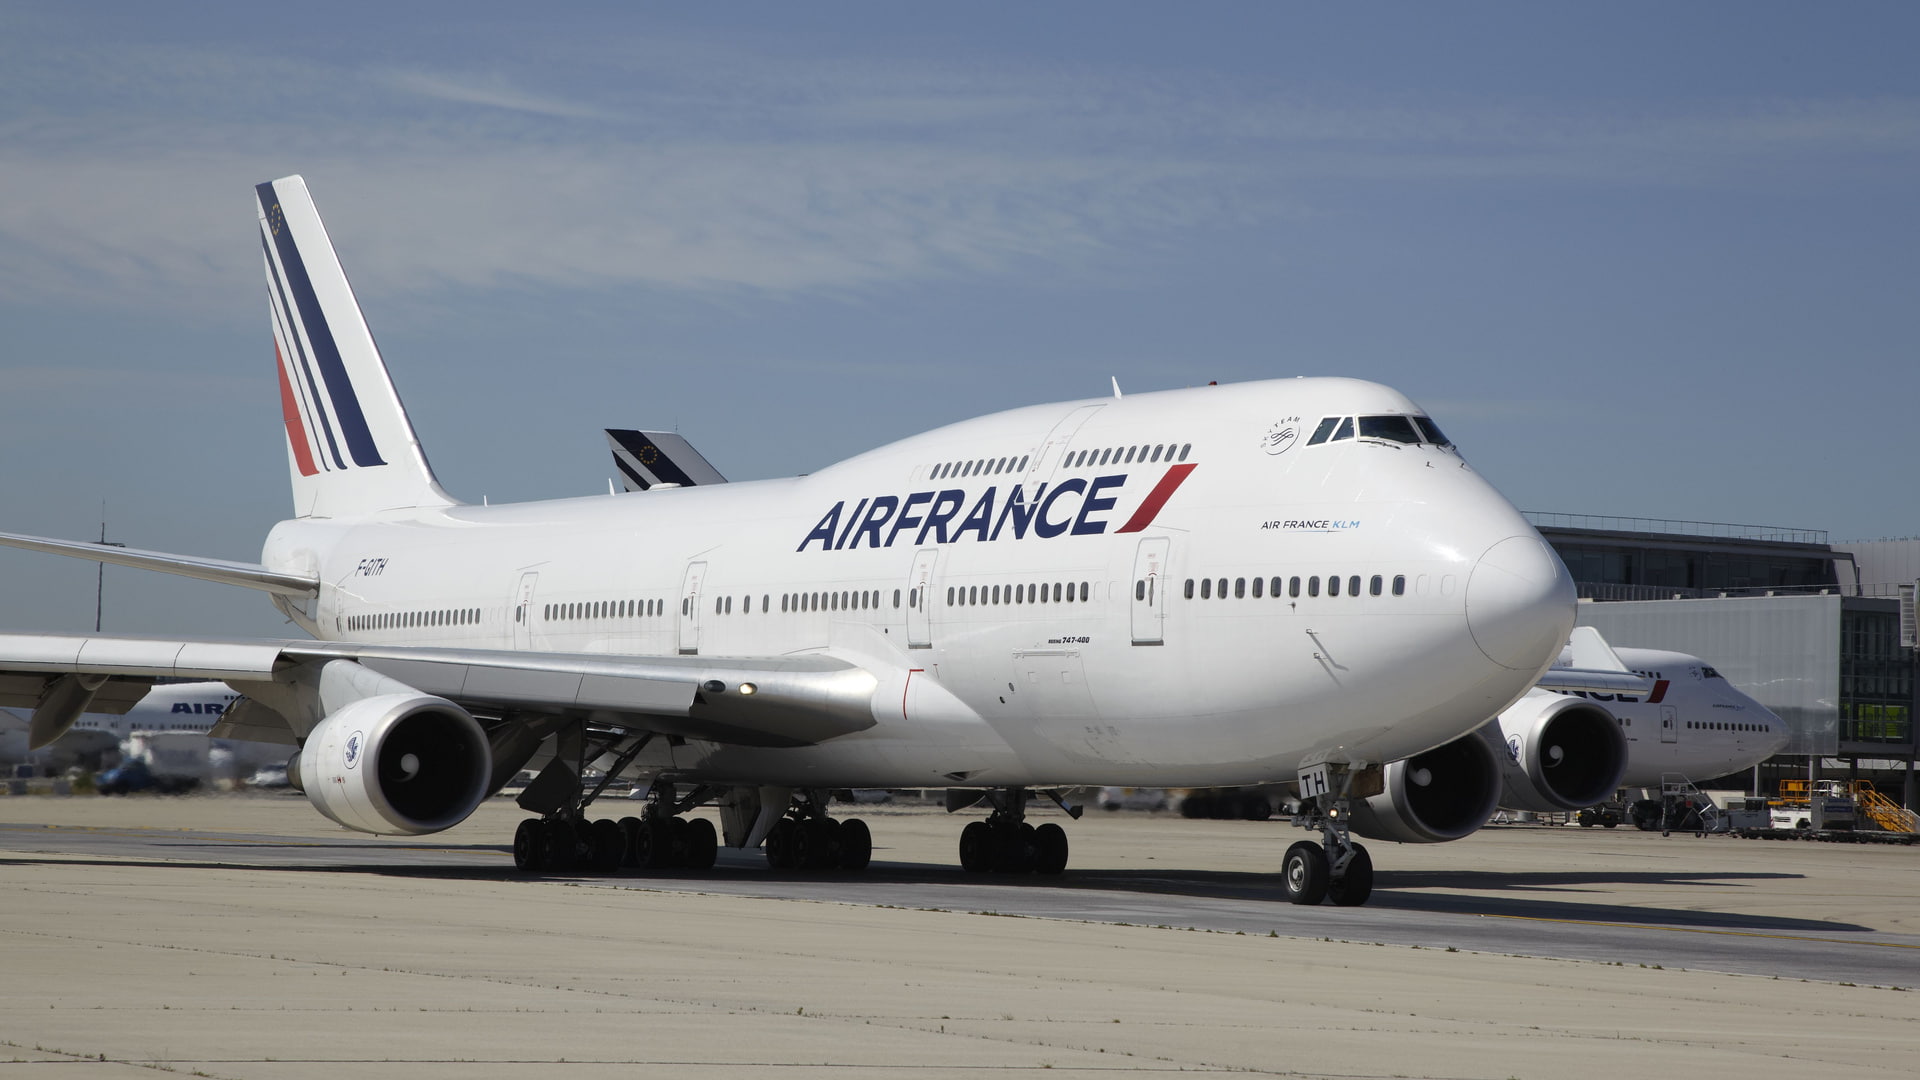 Airport, Boeing, 747, The plane, Passenger, 400, AirFrance